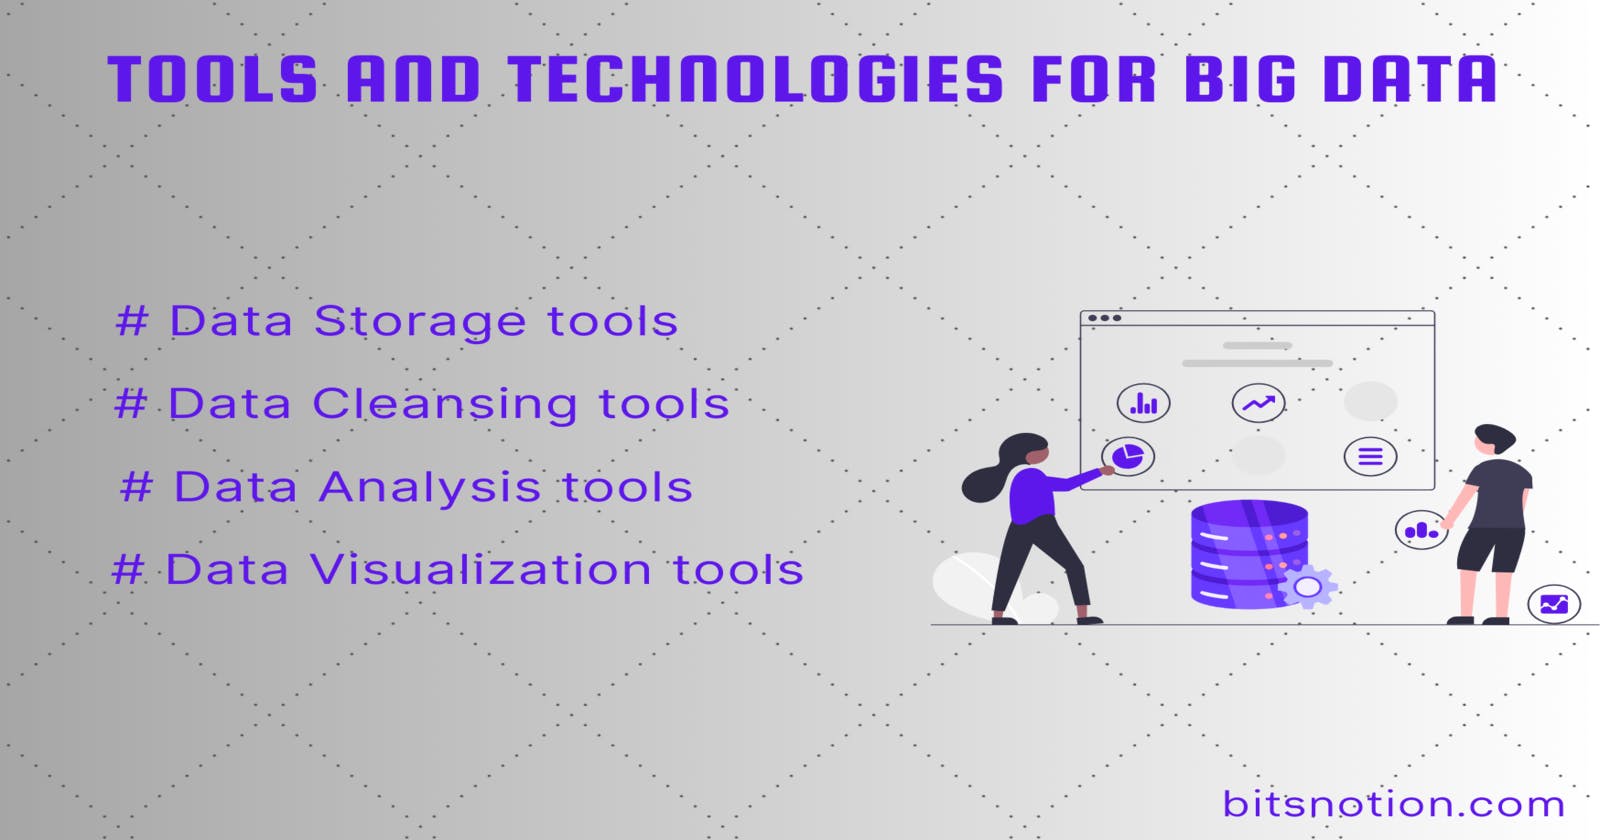 Tools and Technologies For Big Data